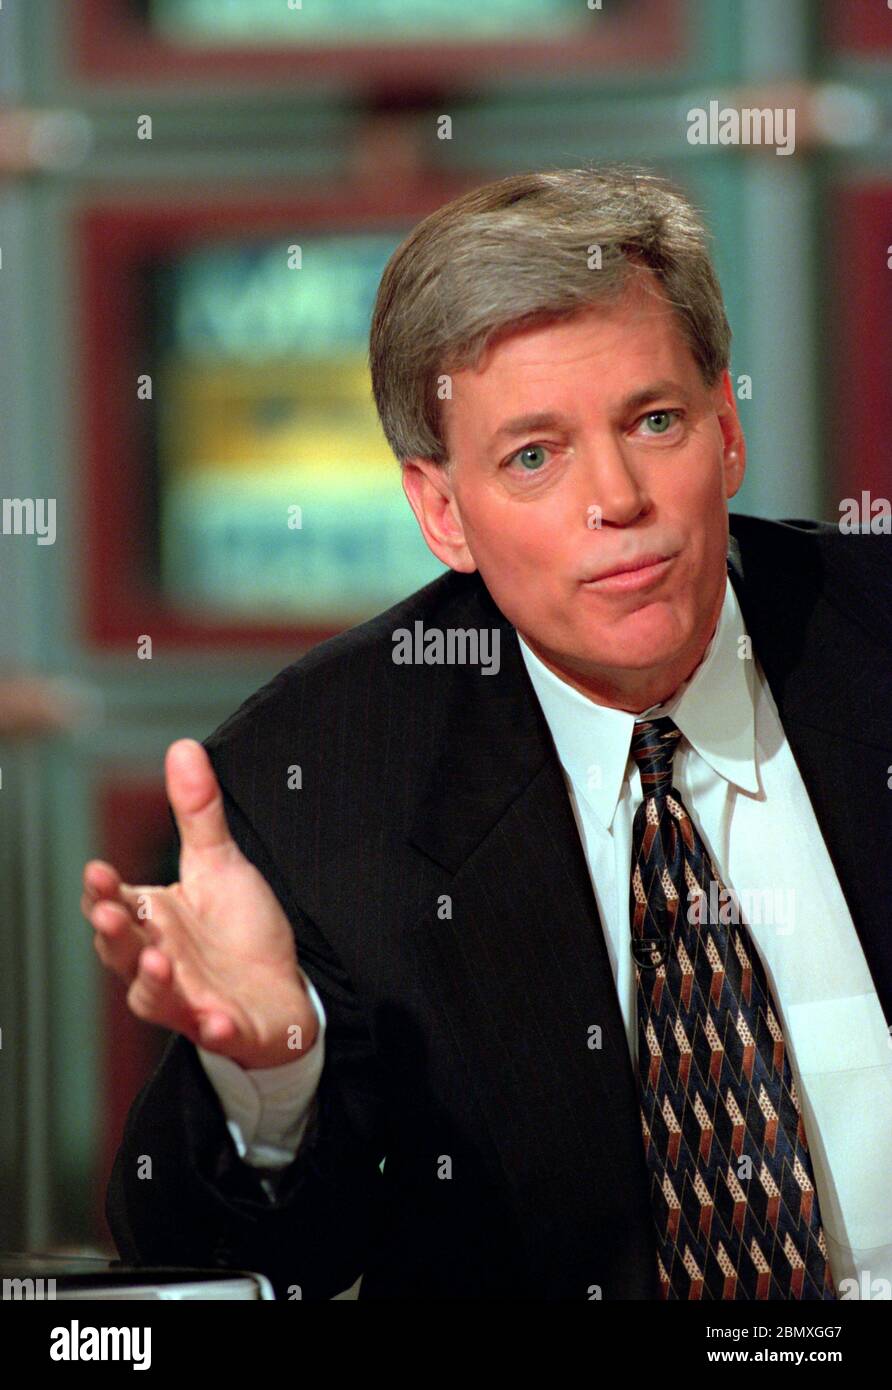 Former Klansman and congressional candidate David Duke discusses his bid for the seat opened by Rep. Bob Livingston during the Sunday political talk show, Meet the Press, on NBC-TV March 28, 1999 in Washington, DC. Stock Photo